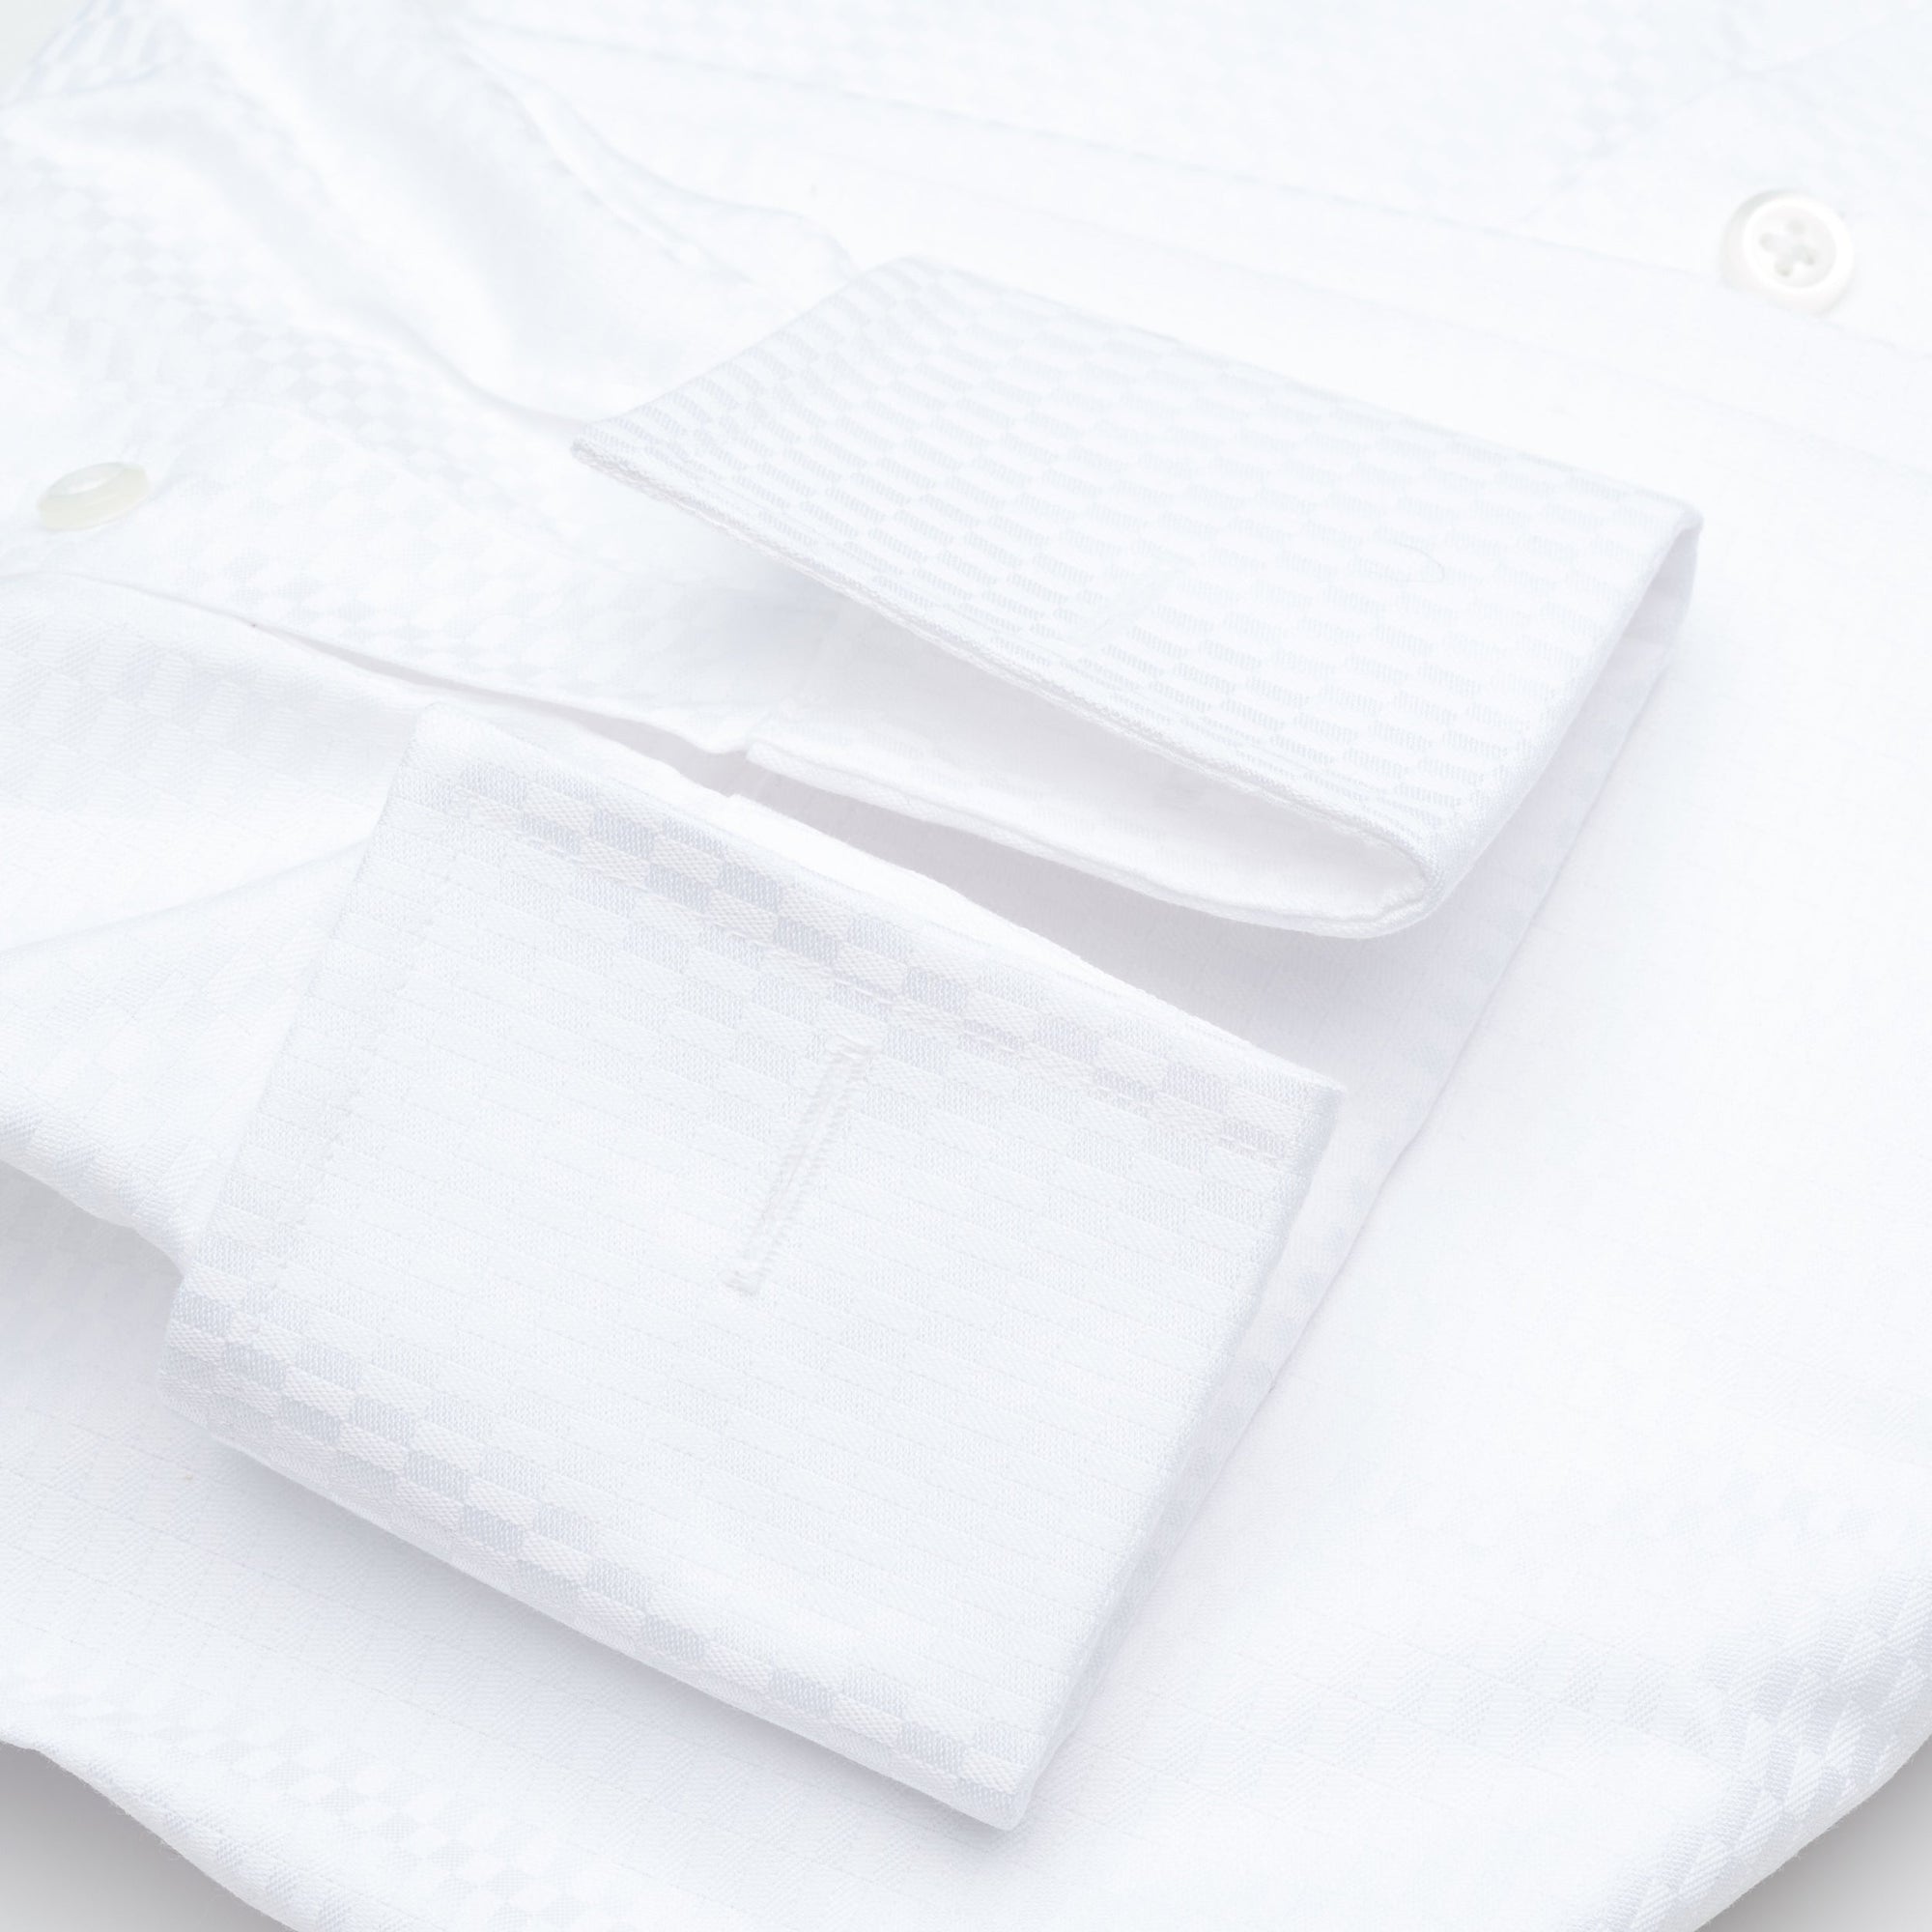 The Tuxedo Shirt - Wrinkle-Free Tonal Check Cotton Dress Shirt in White (Size 17.5 - 34/35) by Cooper & Stewart